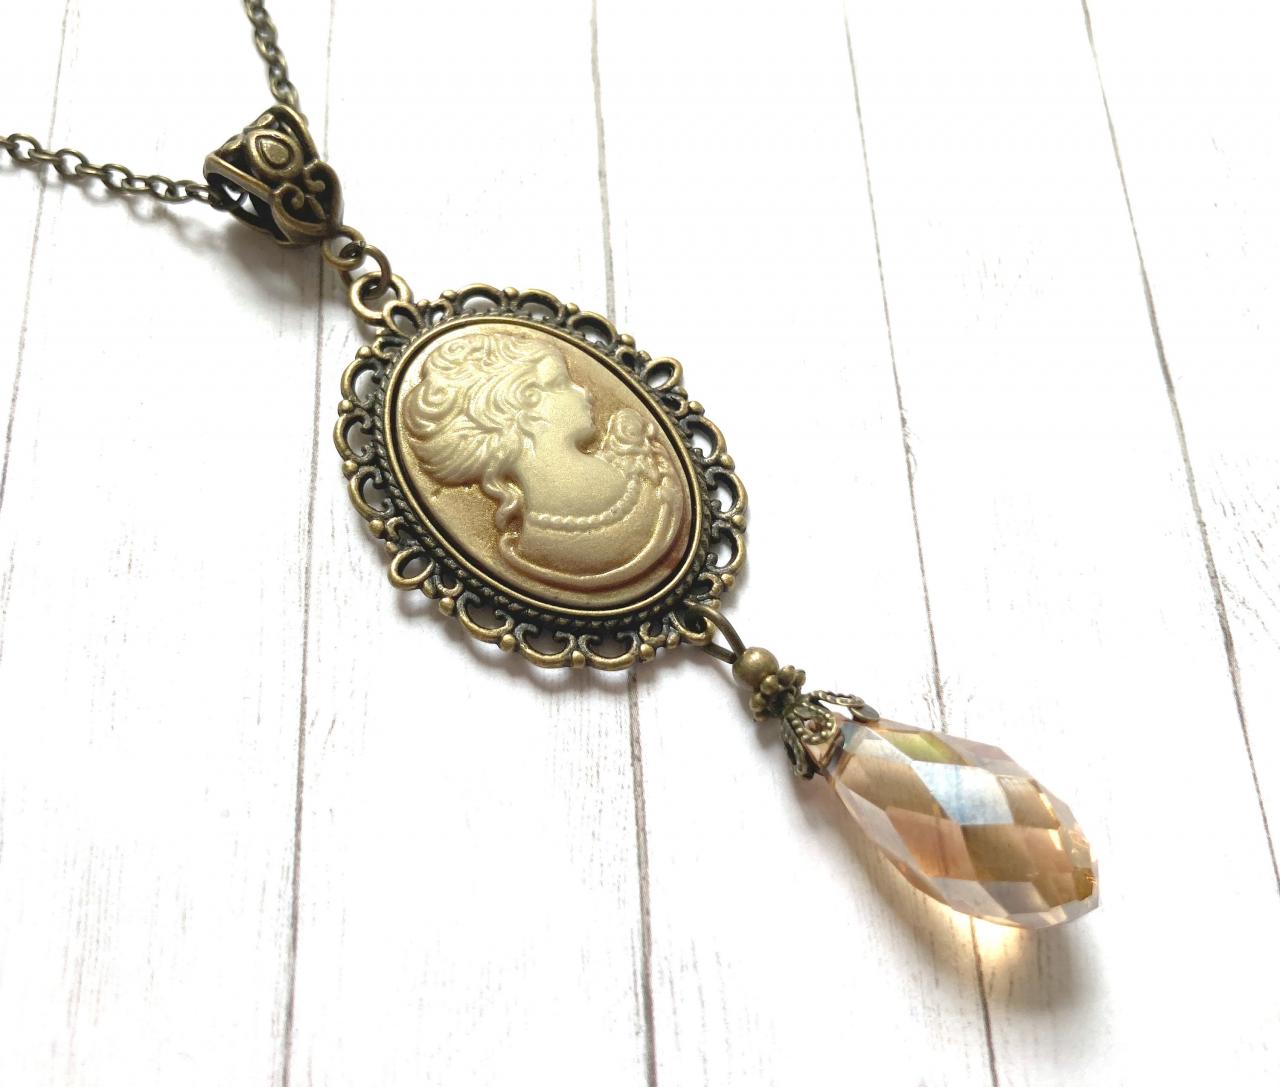 Beautiful Brass Necklace With A Beautifully Detailed Lady Cameo Pendant, Selma Dreams